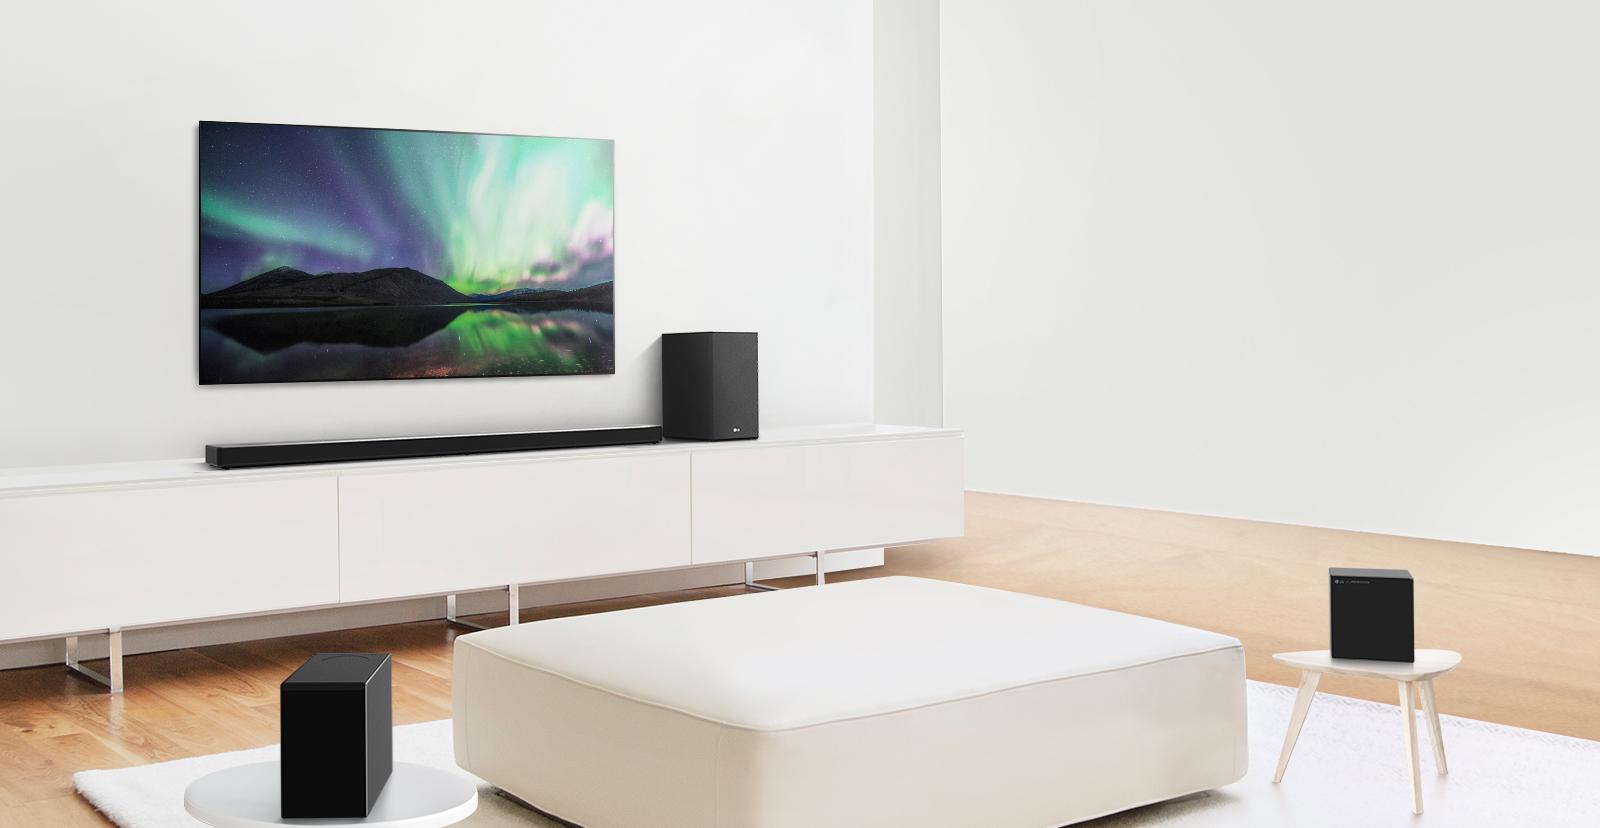 LG hits all the right notes with this Meridian-tuned 7.1.4 soundbar - it's loaded with features and delivers one of the most immersive listening experiences we’ve heard from a soundbar system.